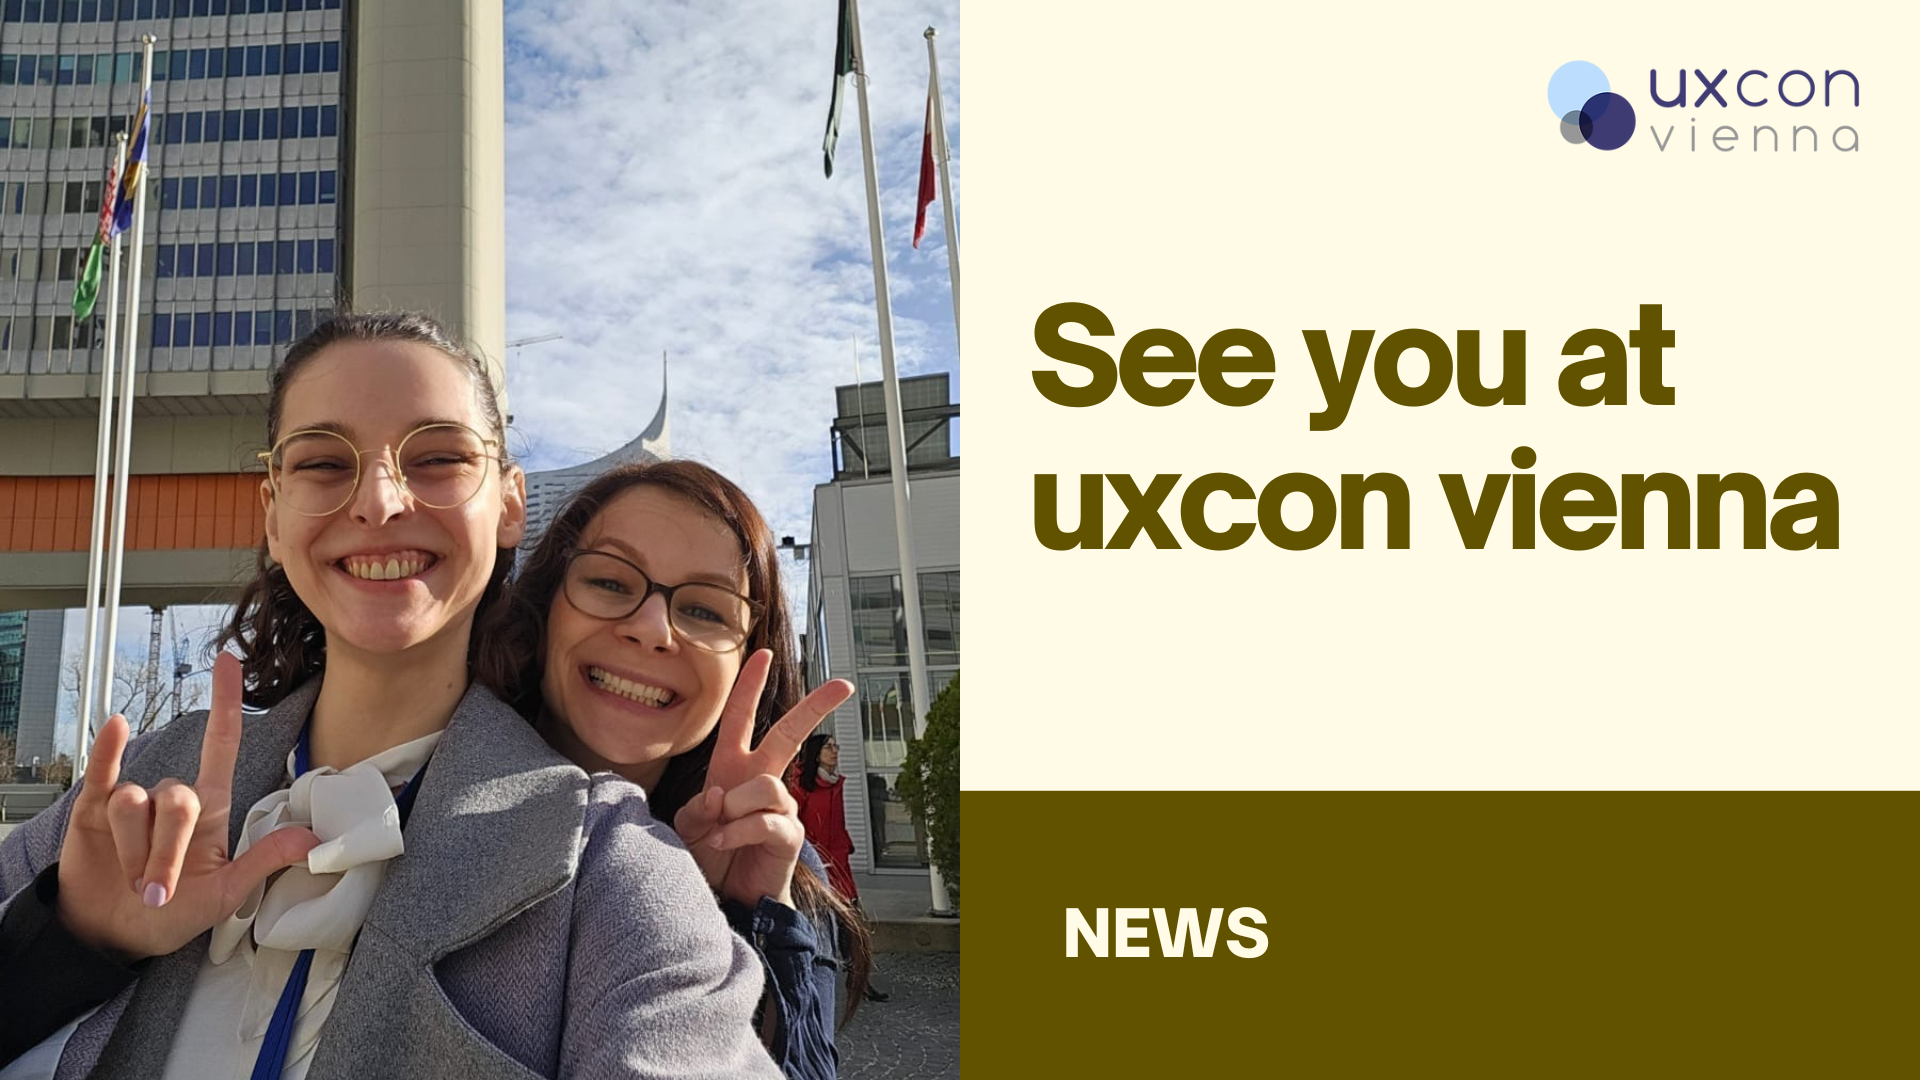 See you at uxcon vienna